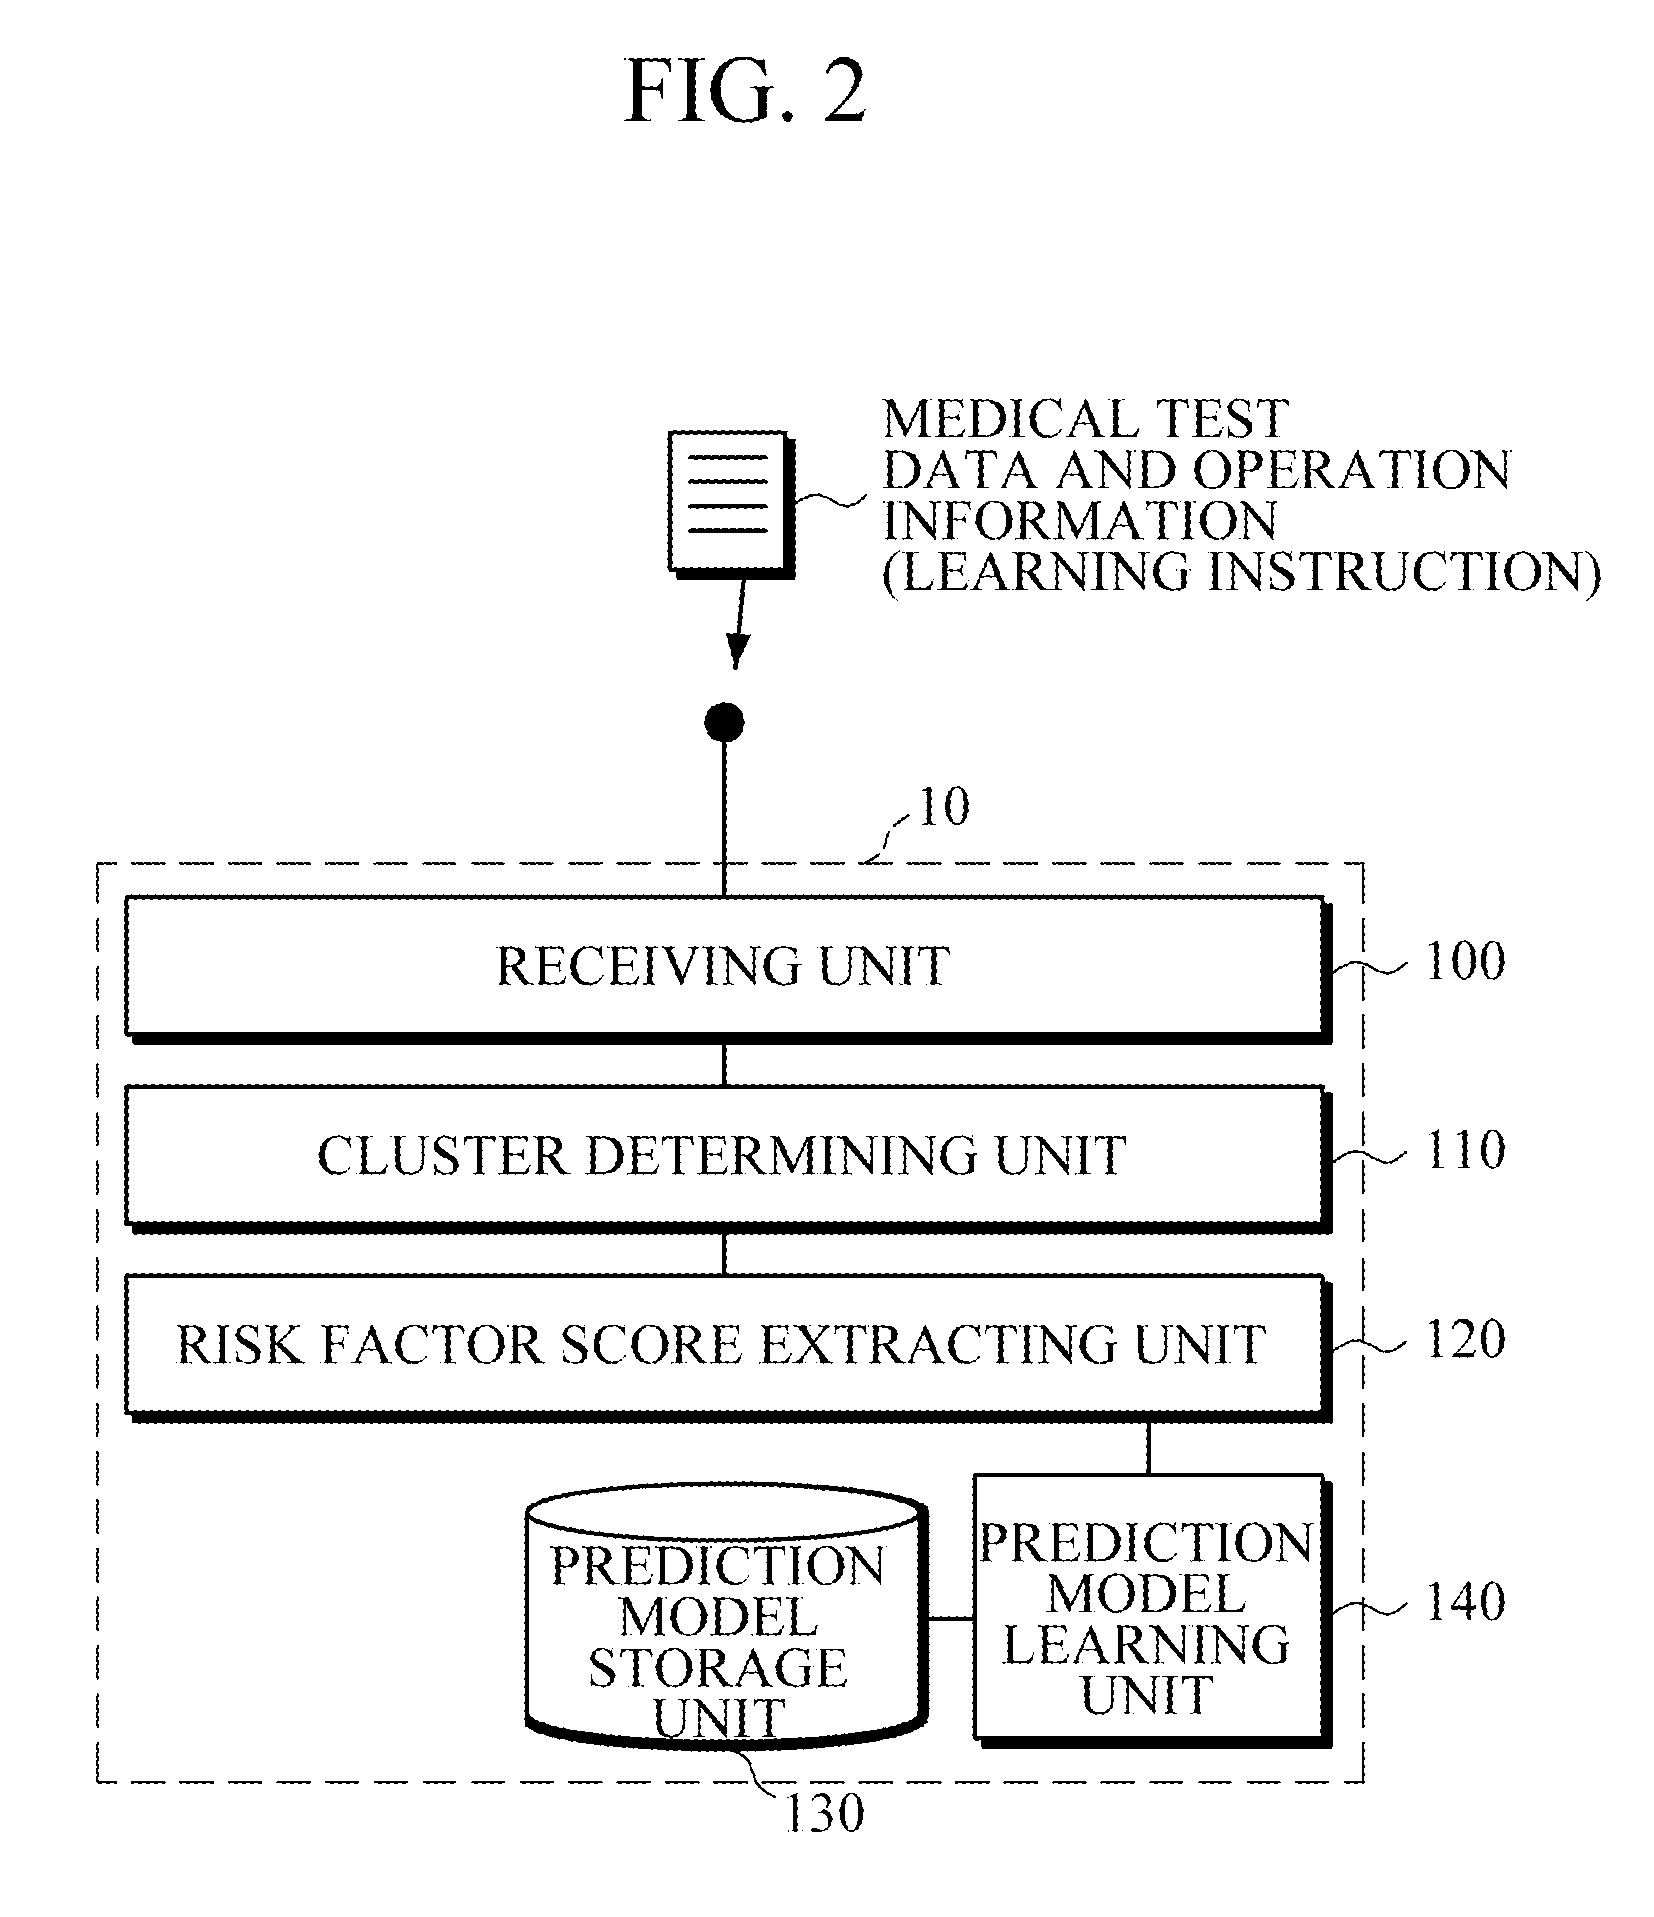 Apparatus and method for predicting potential change of coronary artery calcification (CAC) level